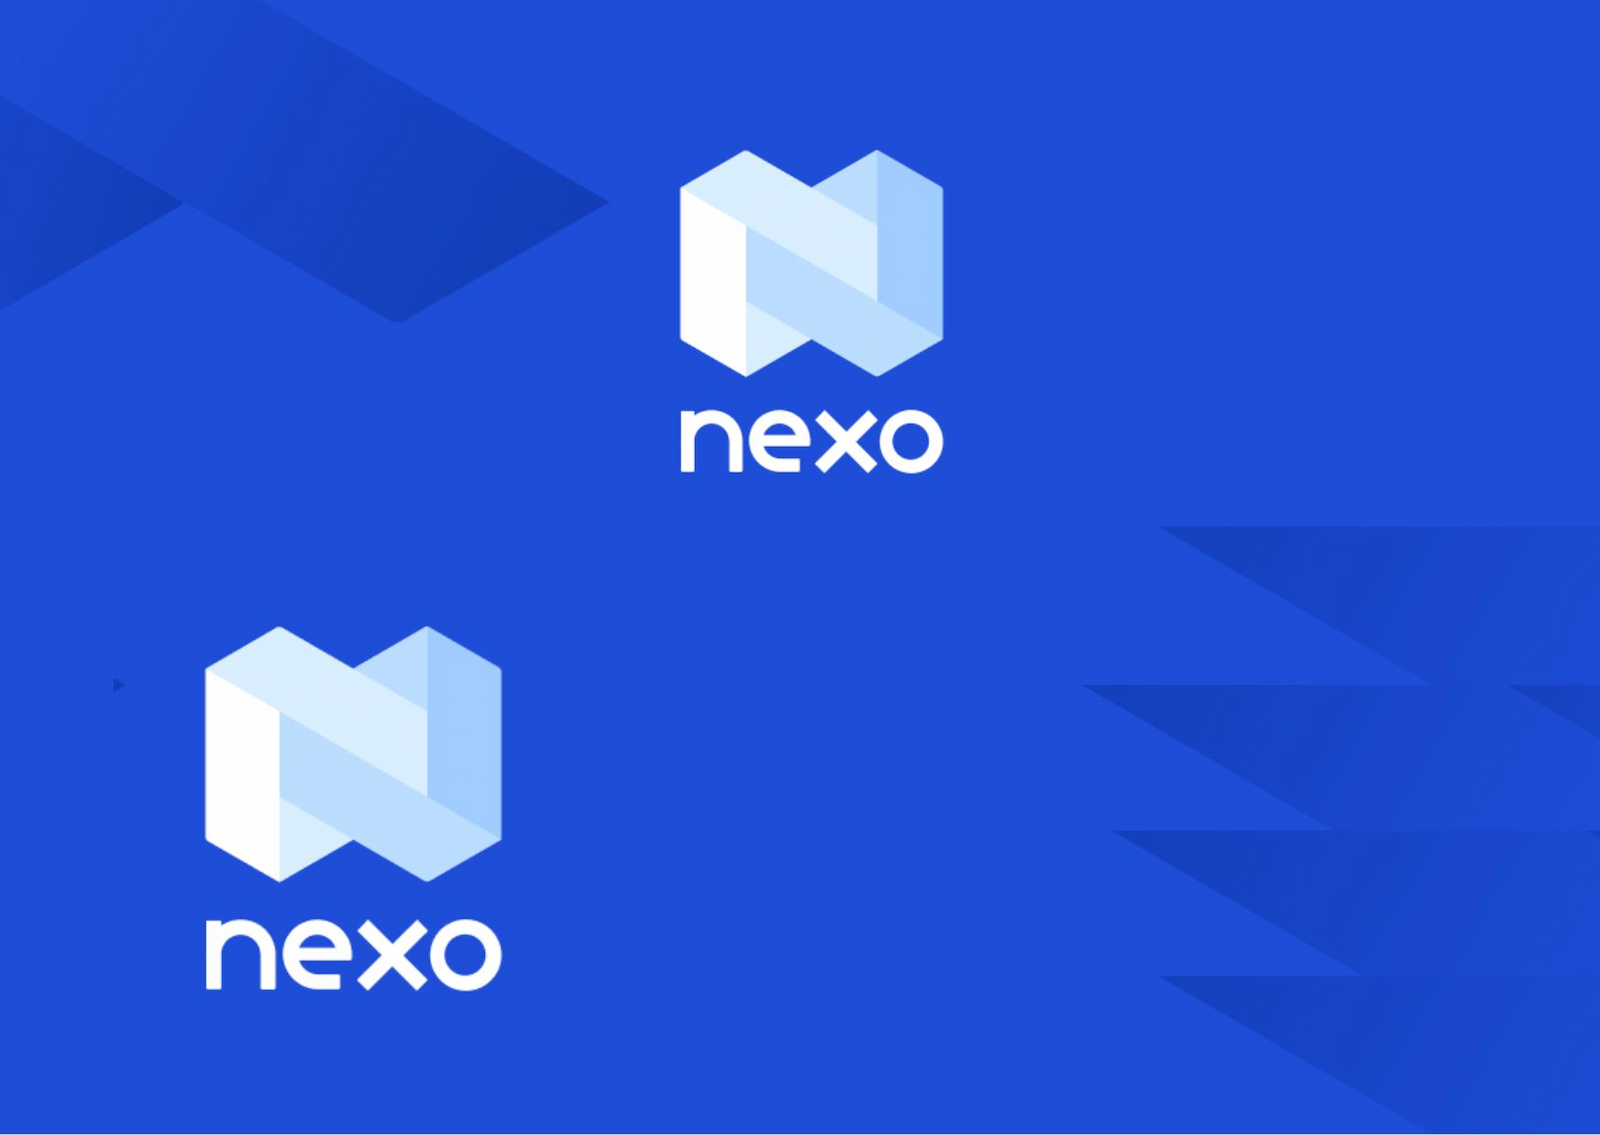 Bulgarian police have raided the office of crypto lender NEXO in Sofia. Authorities have accused it of illicit activities